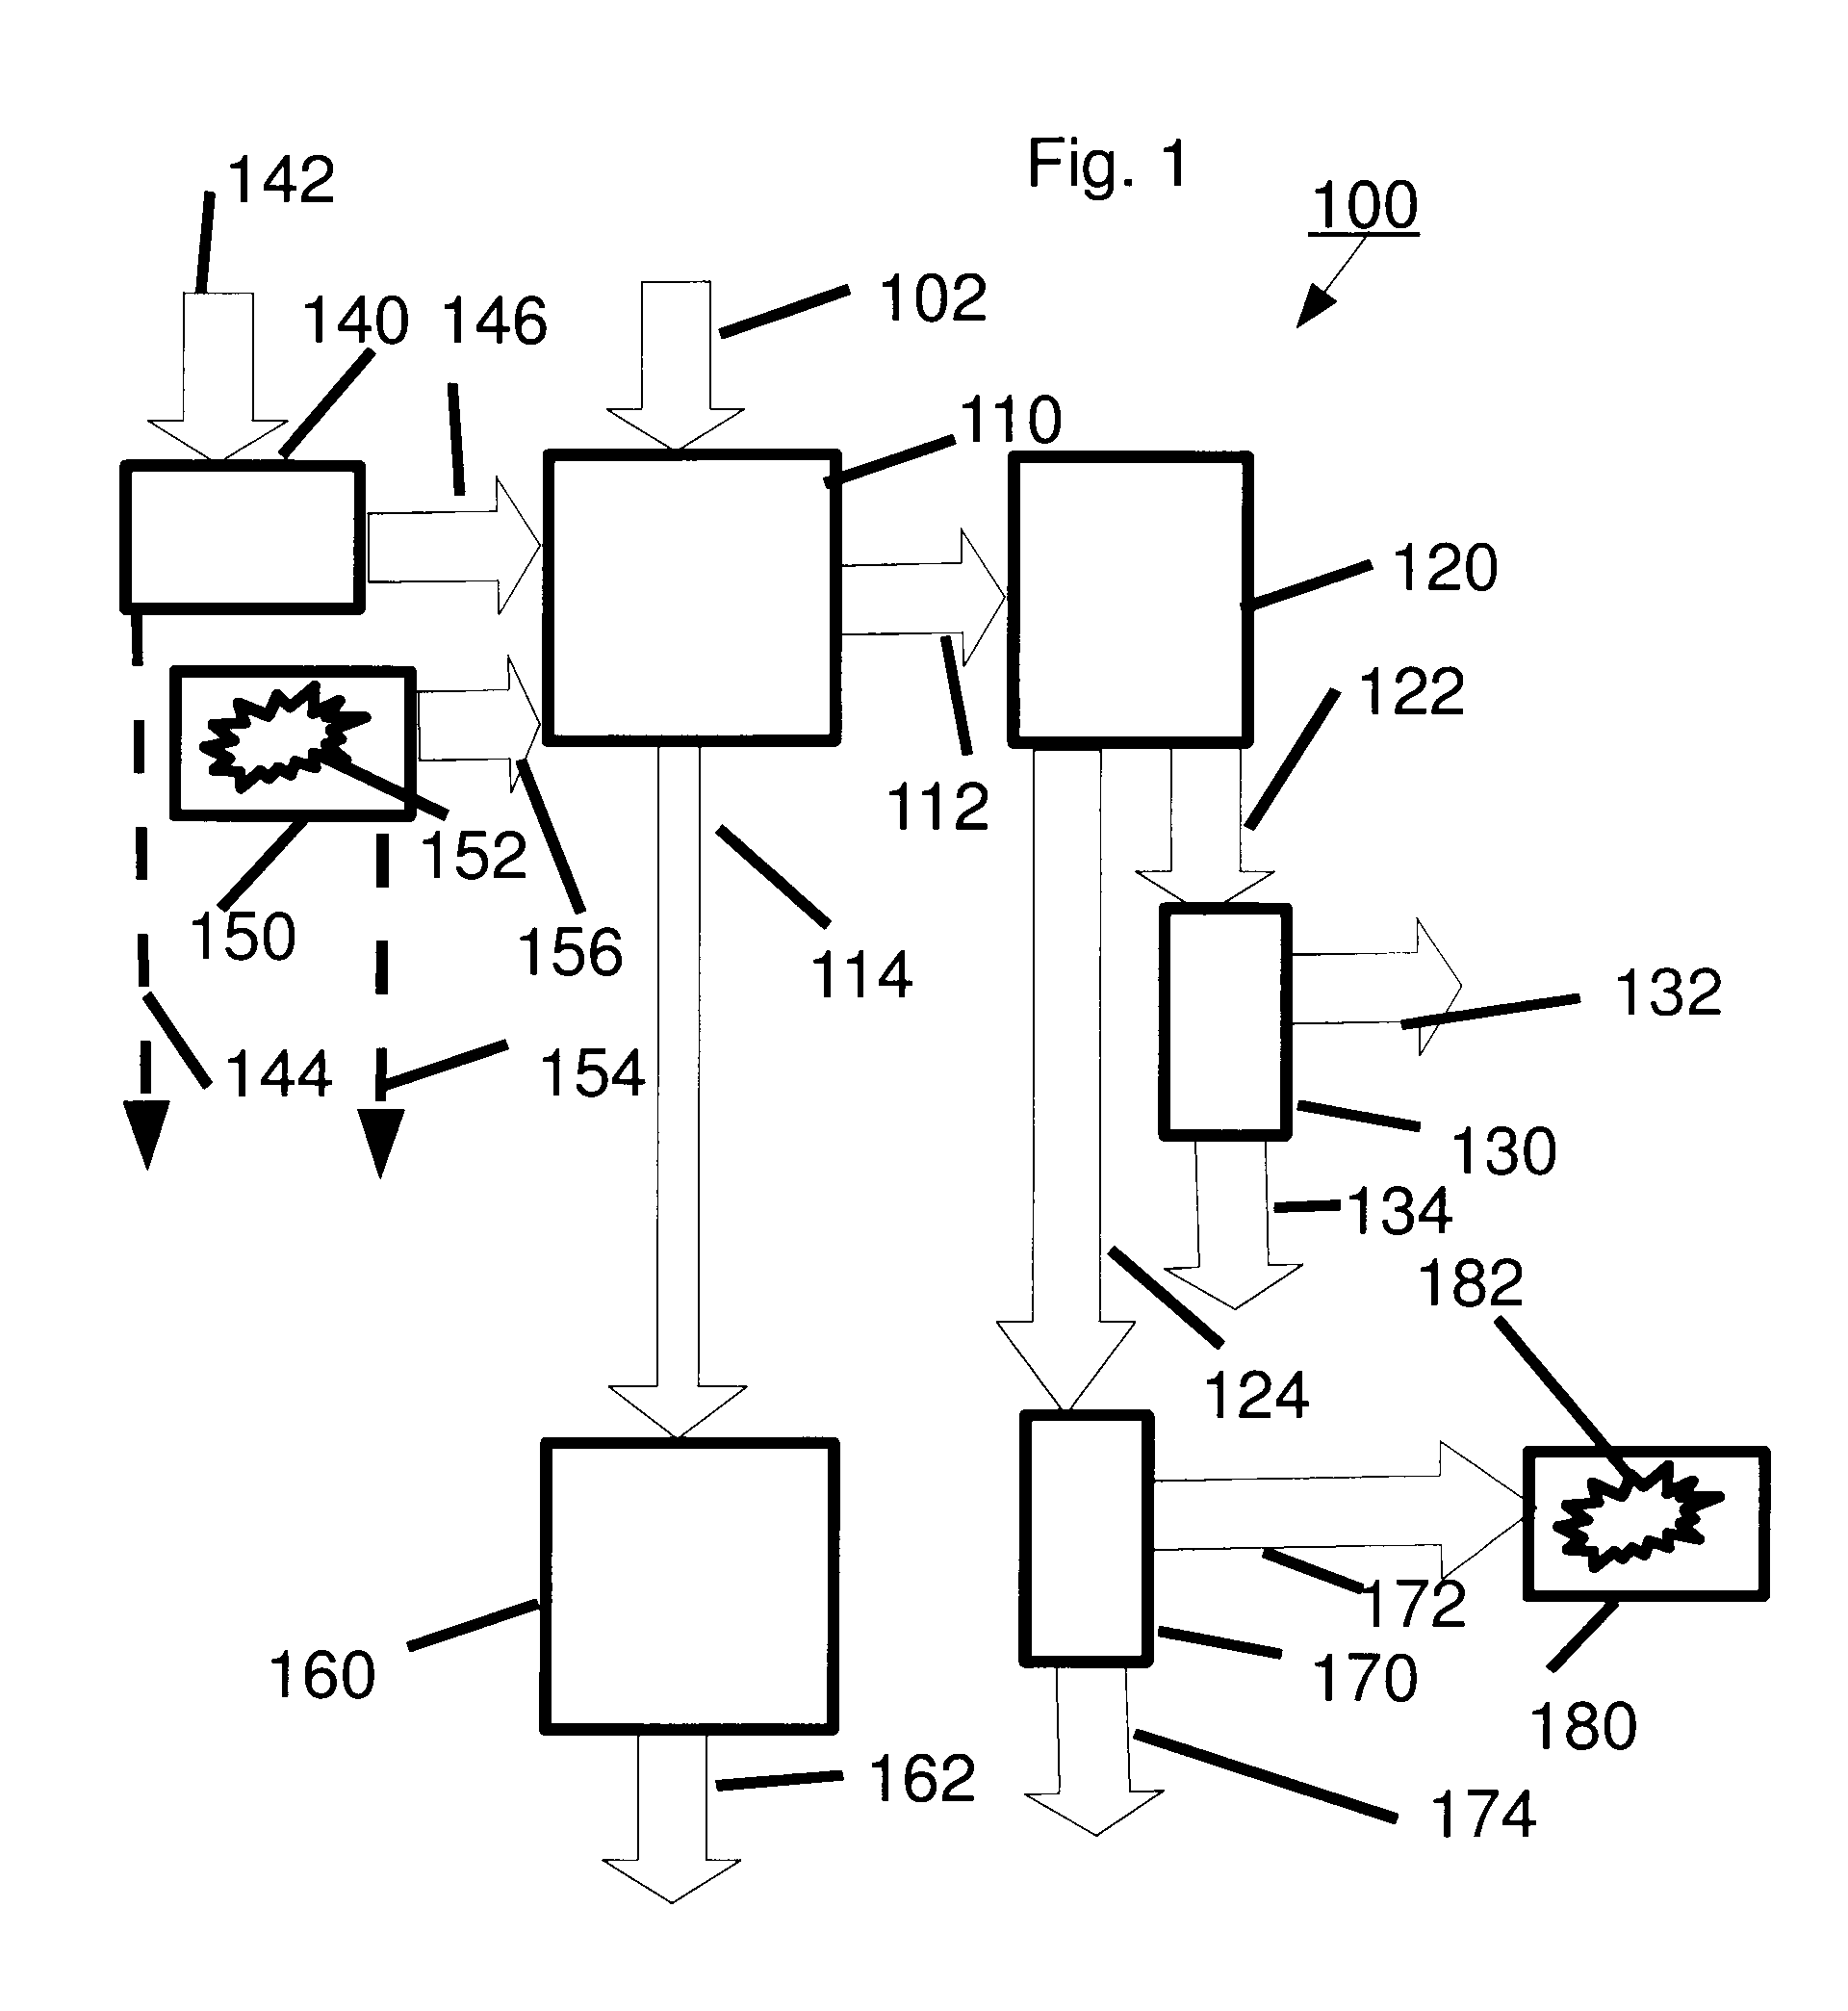 Methods and systems for processing a sucrose crop and sugar mixtures